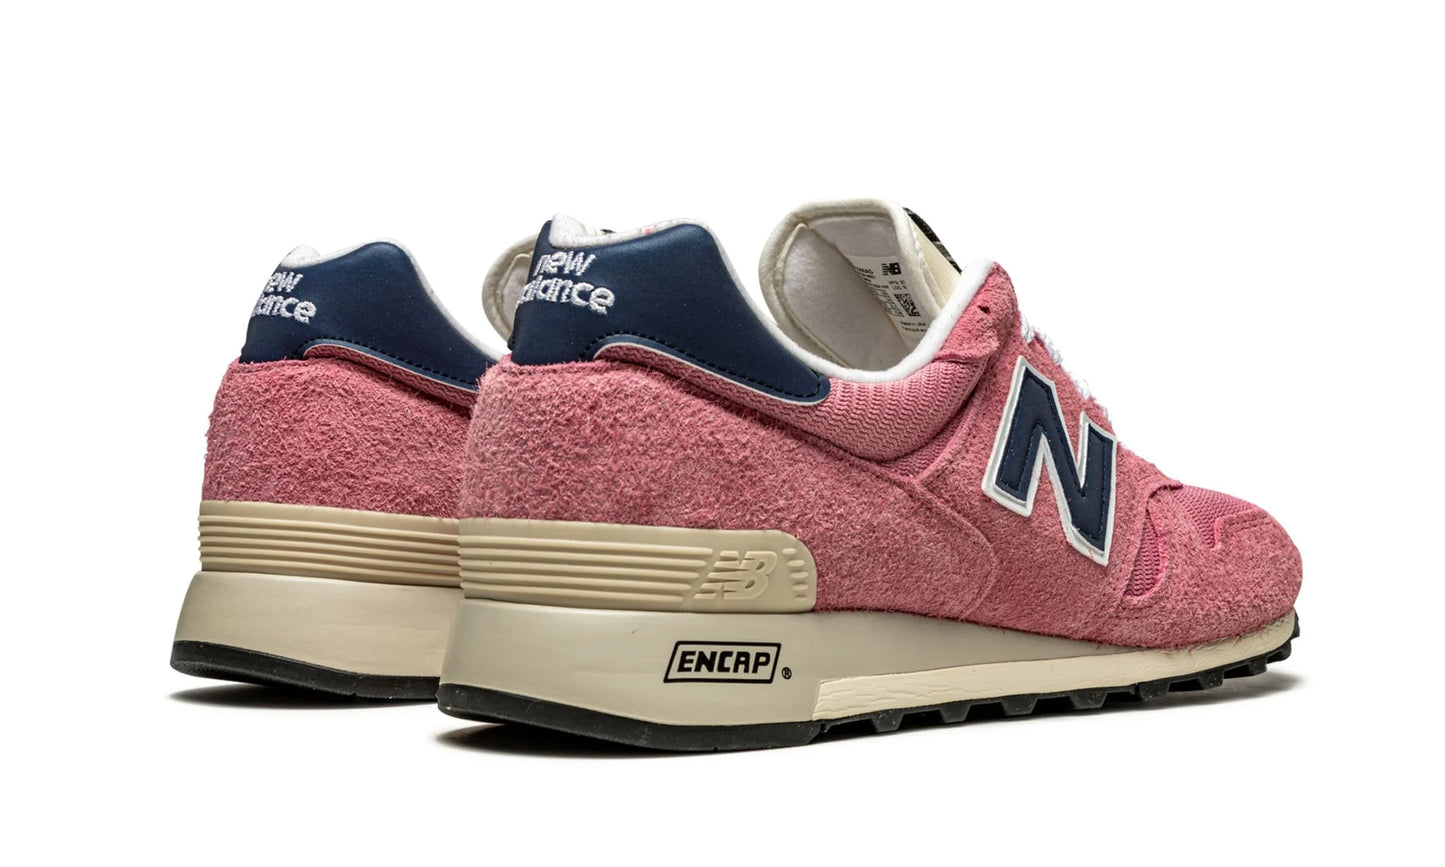 New Balance 1300 Aime Leon Dore Pink (PRE-OWNED)